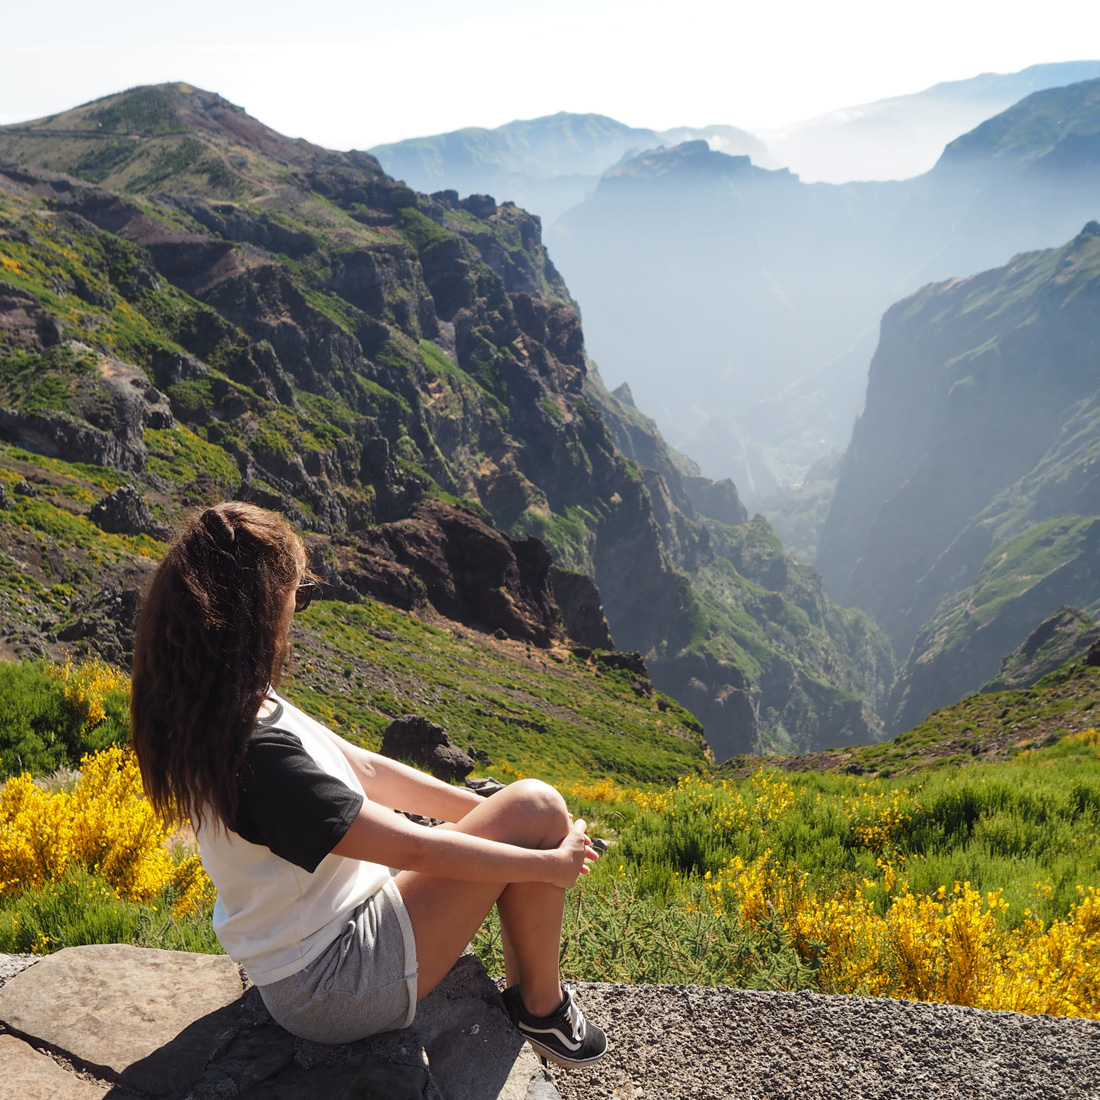 one week in Madeira 10 things to do